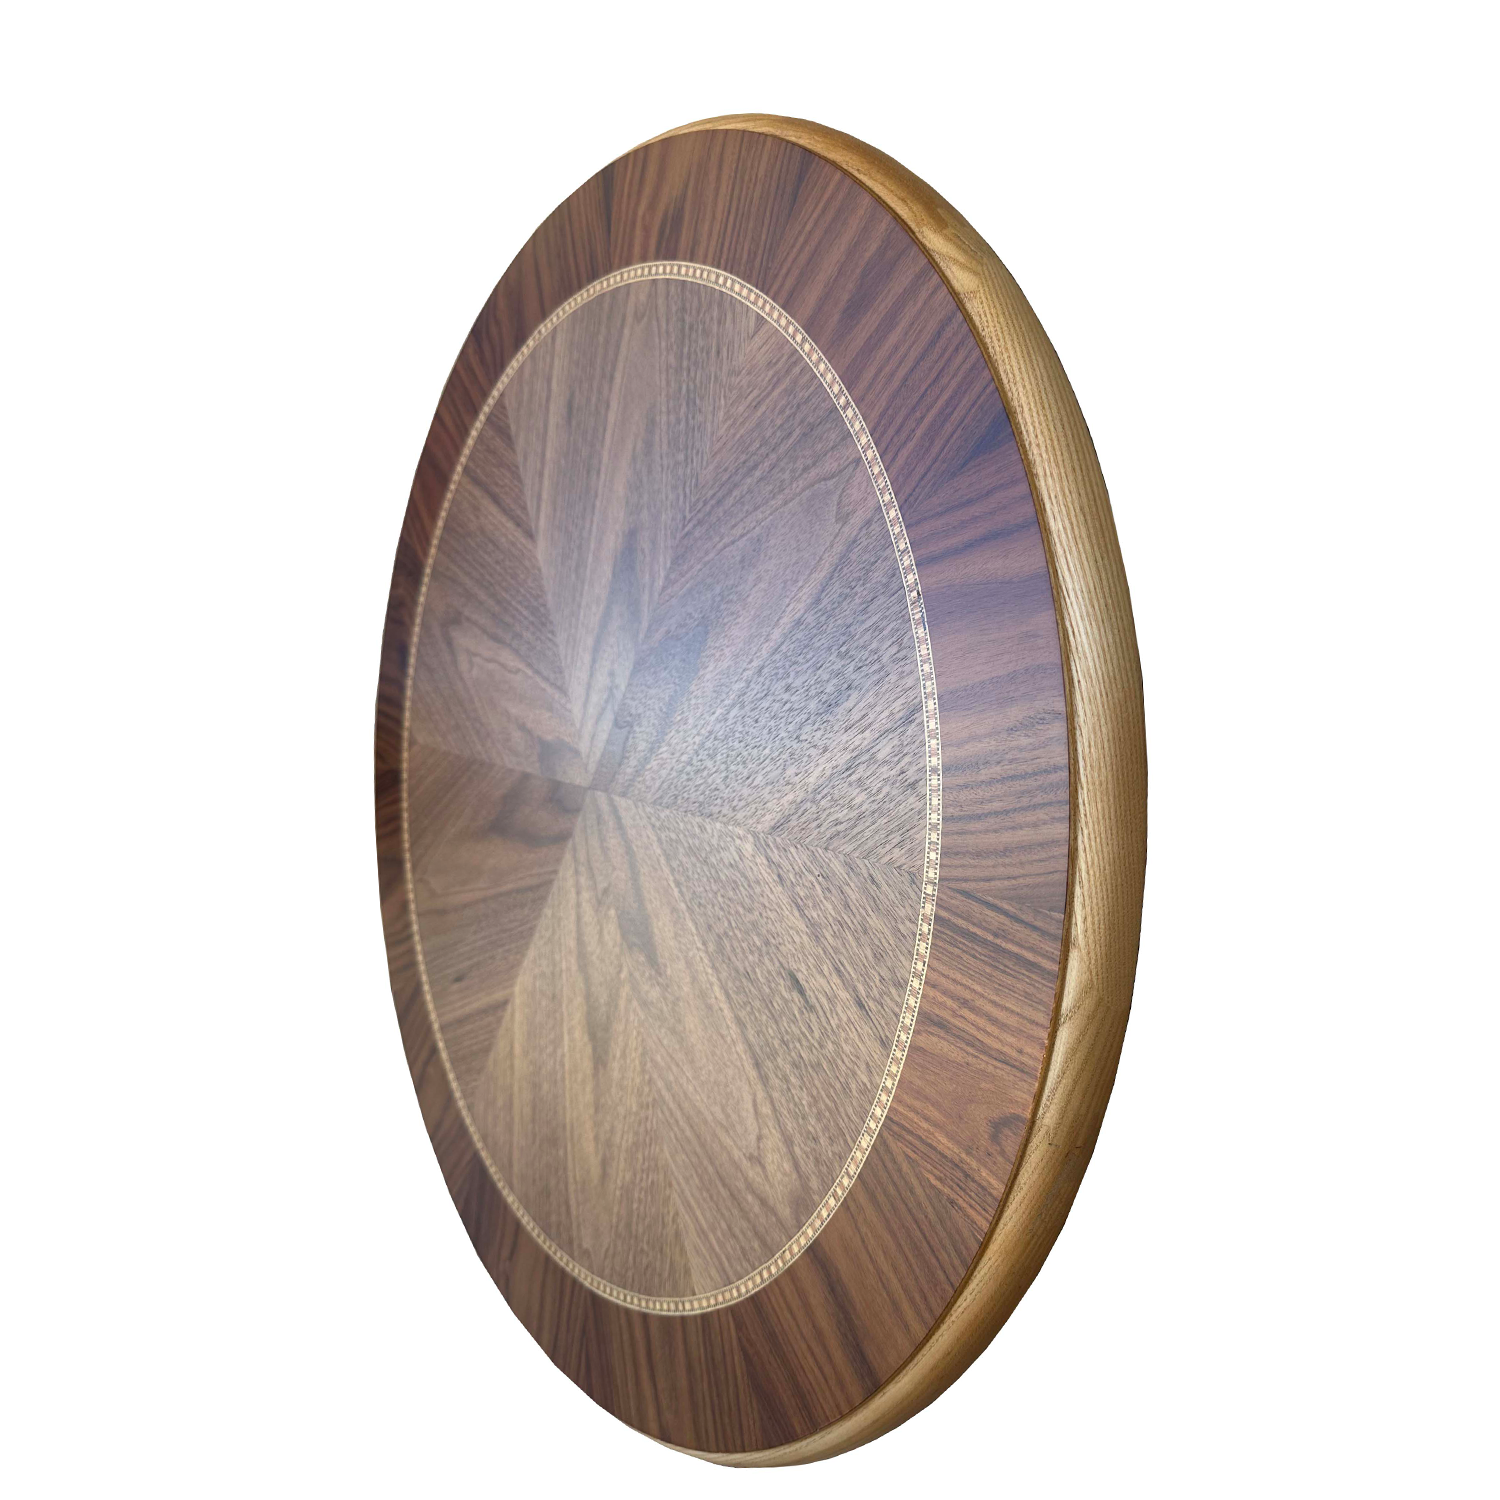 FV-17  Round Table tops| wood table tops| Coffee table tops| Dining table tops DIA60cm DIA80cm